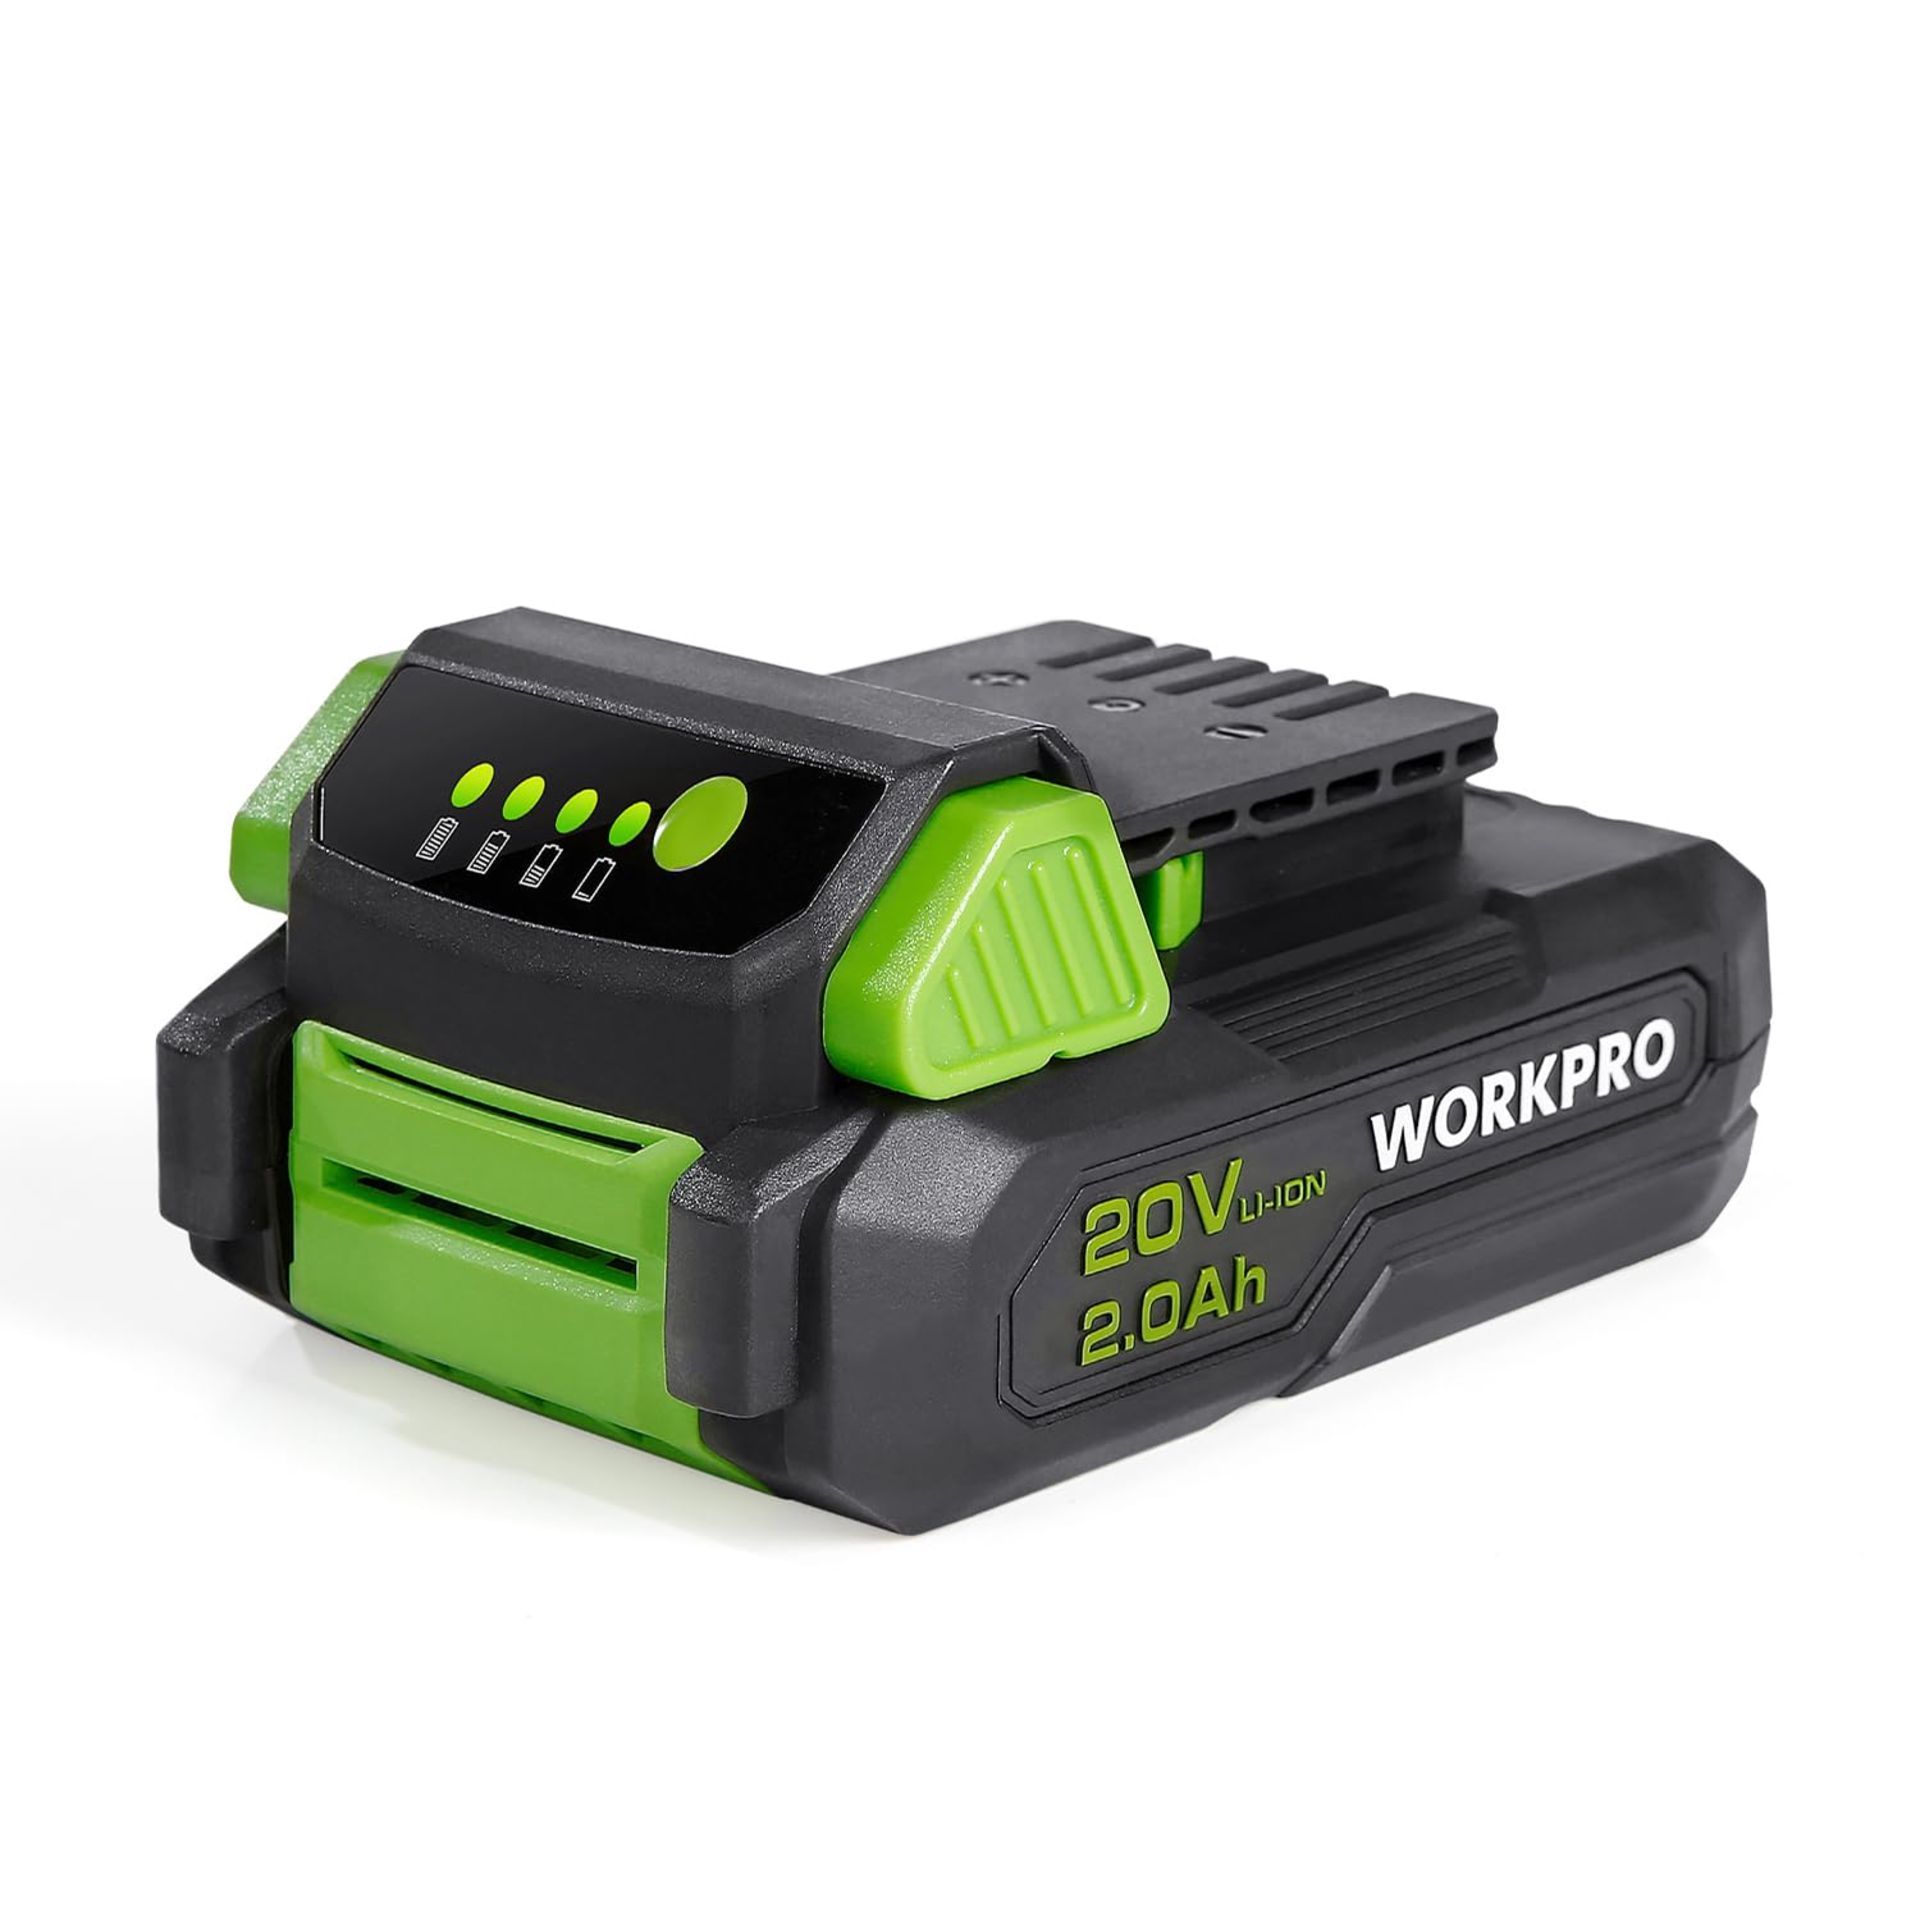 RRP £29.67 WORKPRO 20V 2.0Ah Lithium-ion Battery with Power Indicator